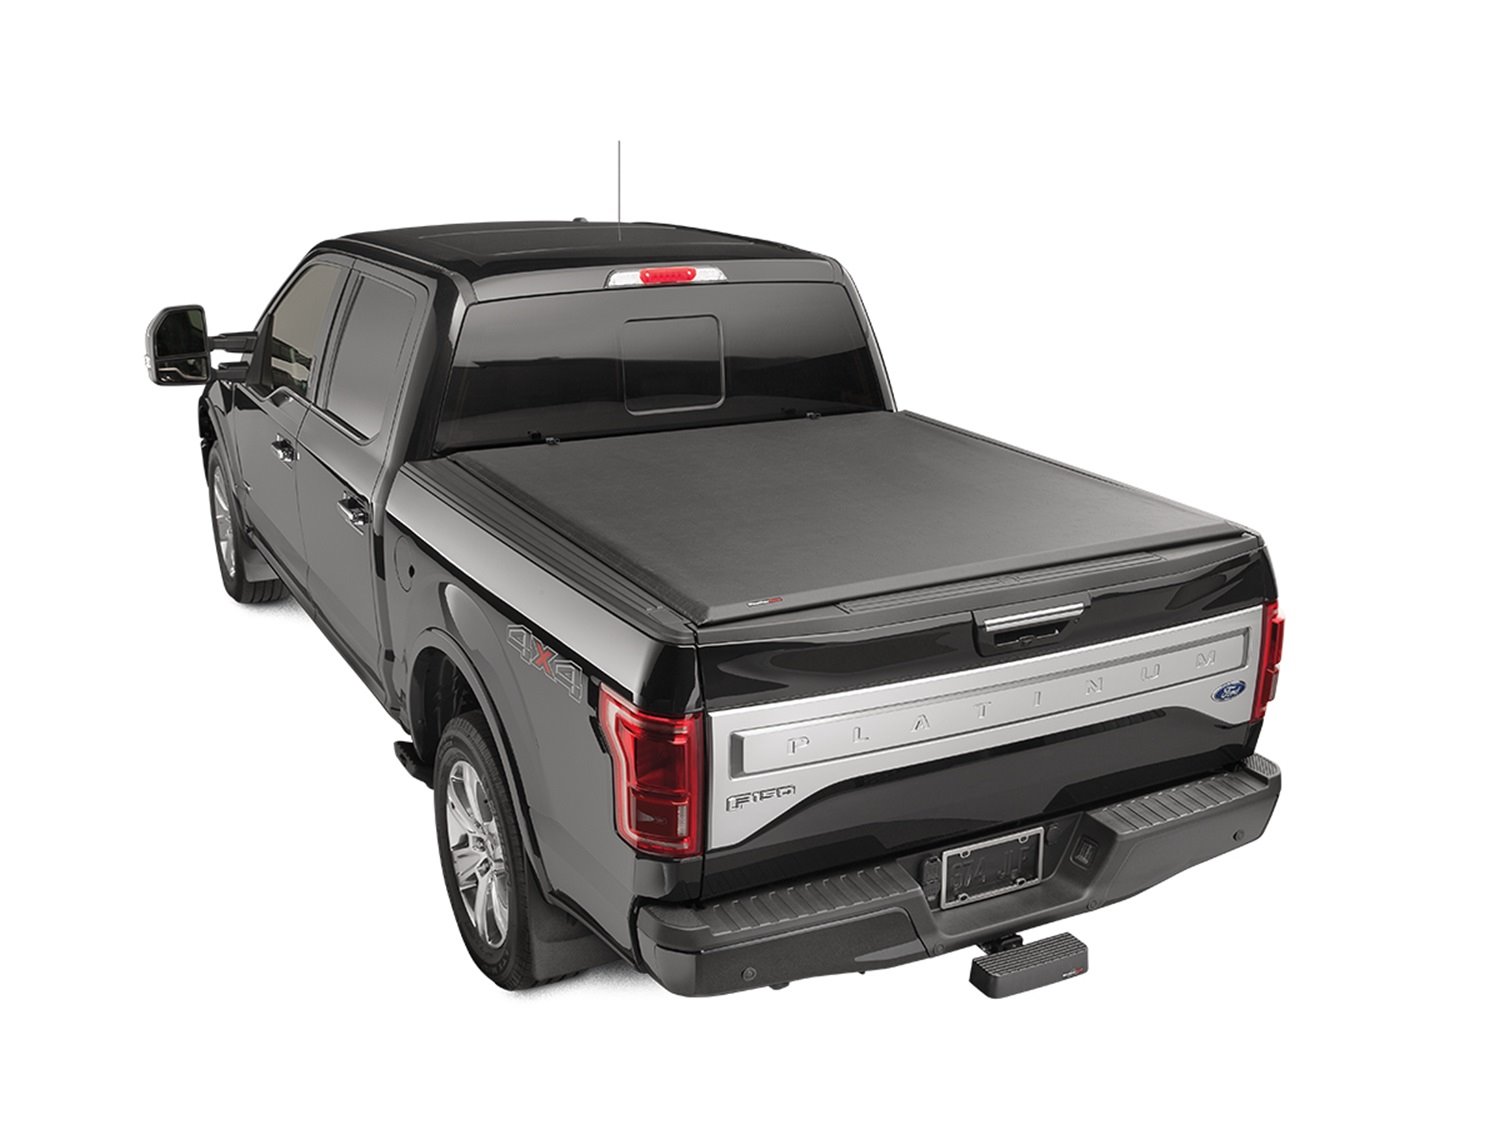 ROLL UP TRUCK BED COVER B TOYOTA TACOMA 2005-2015 TACOMA 6 BED